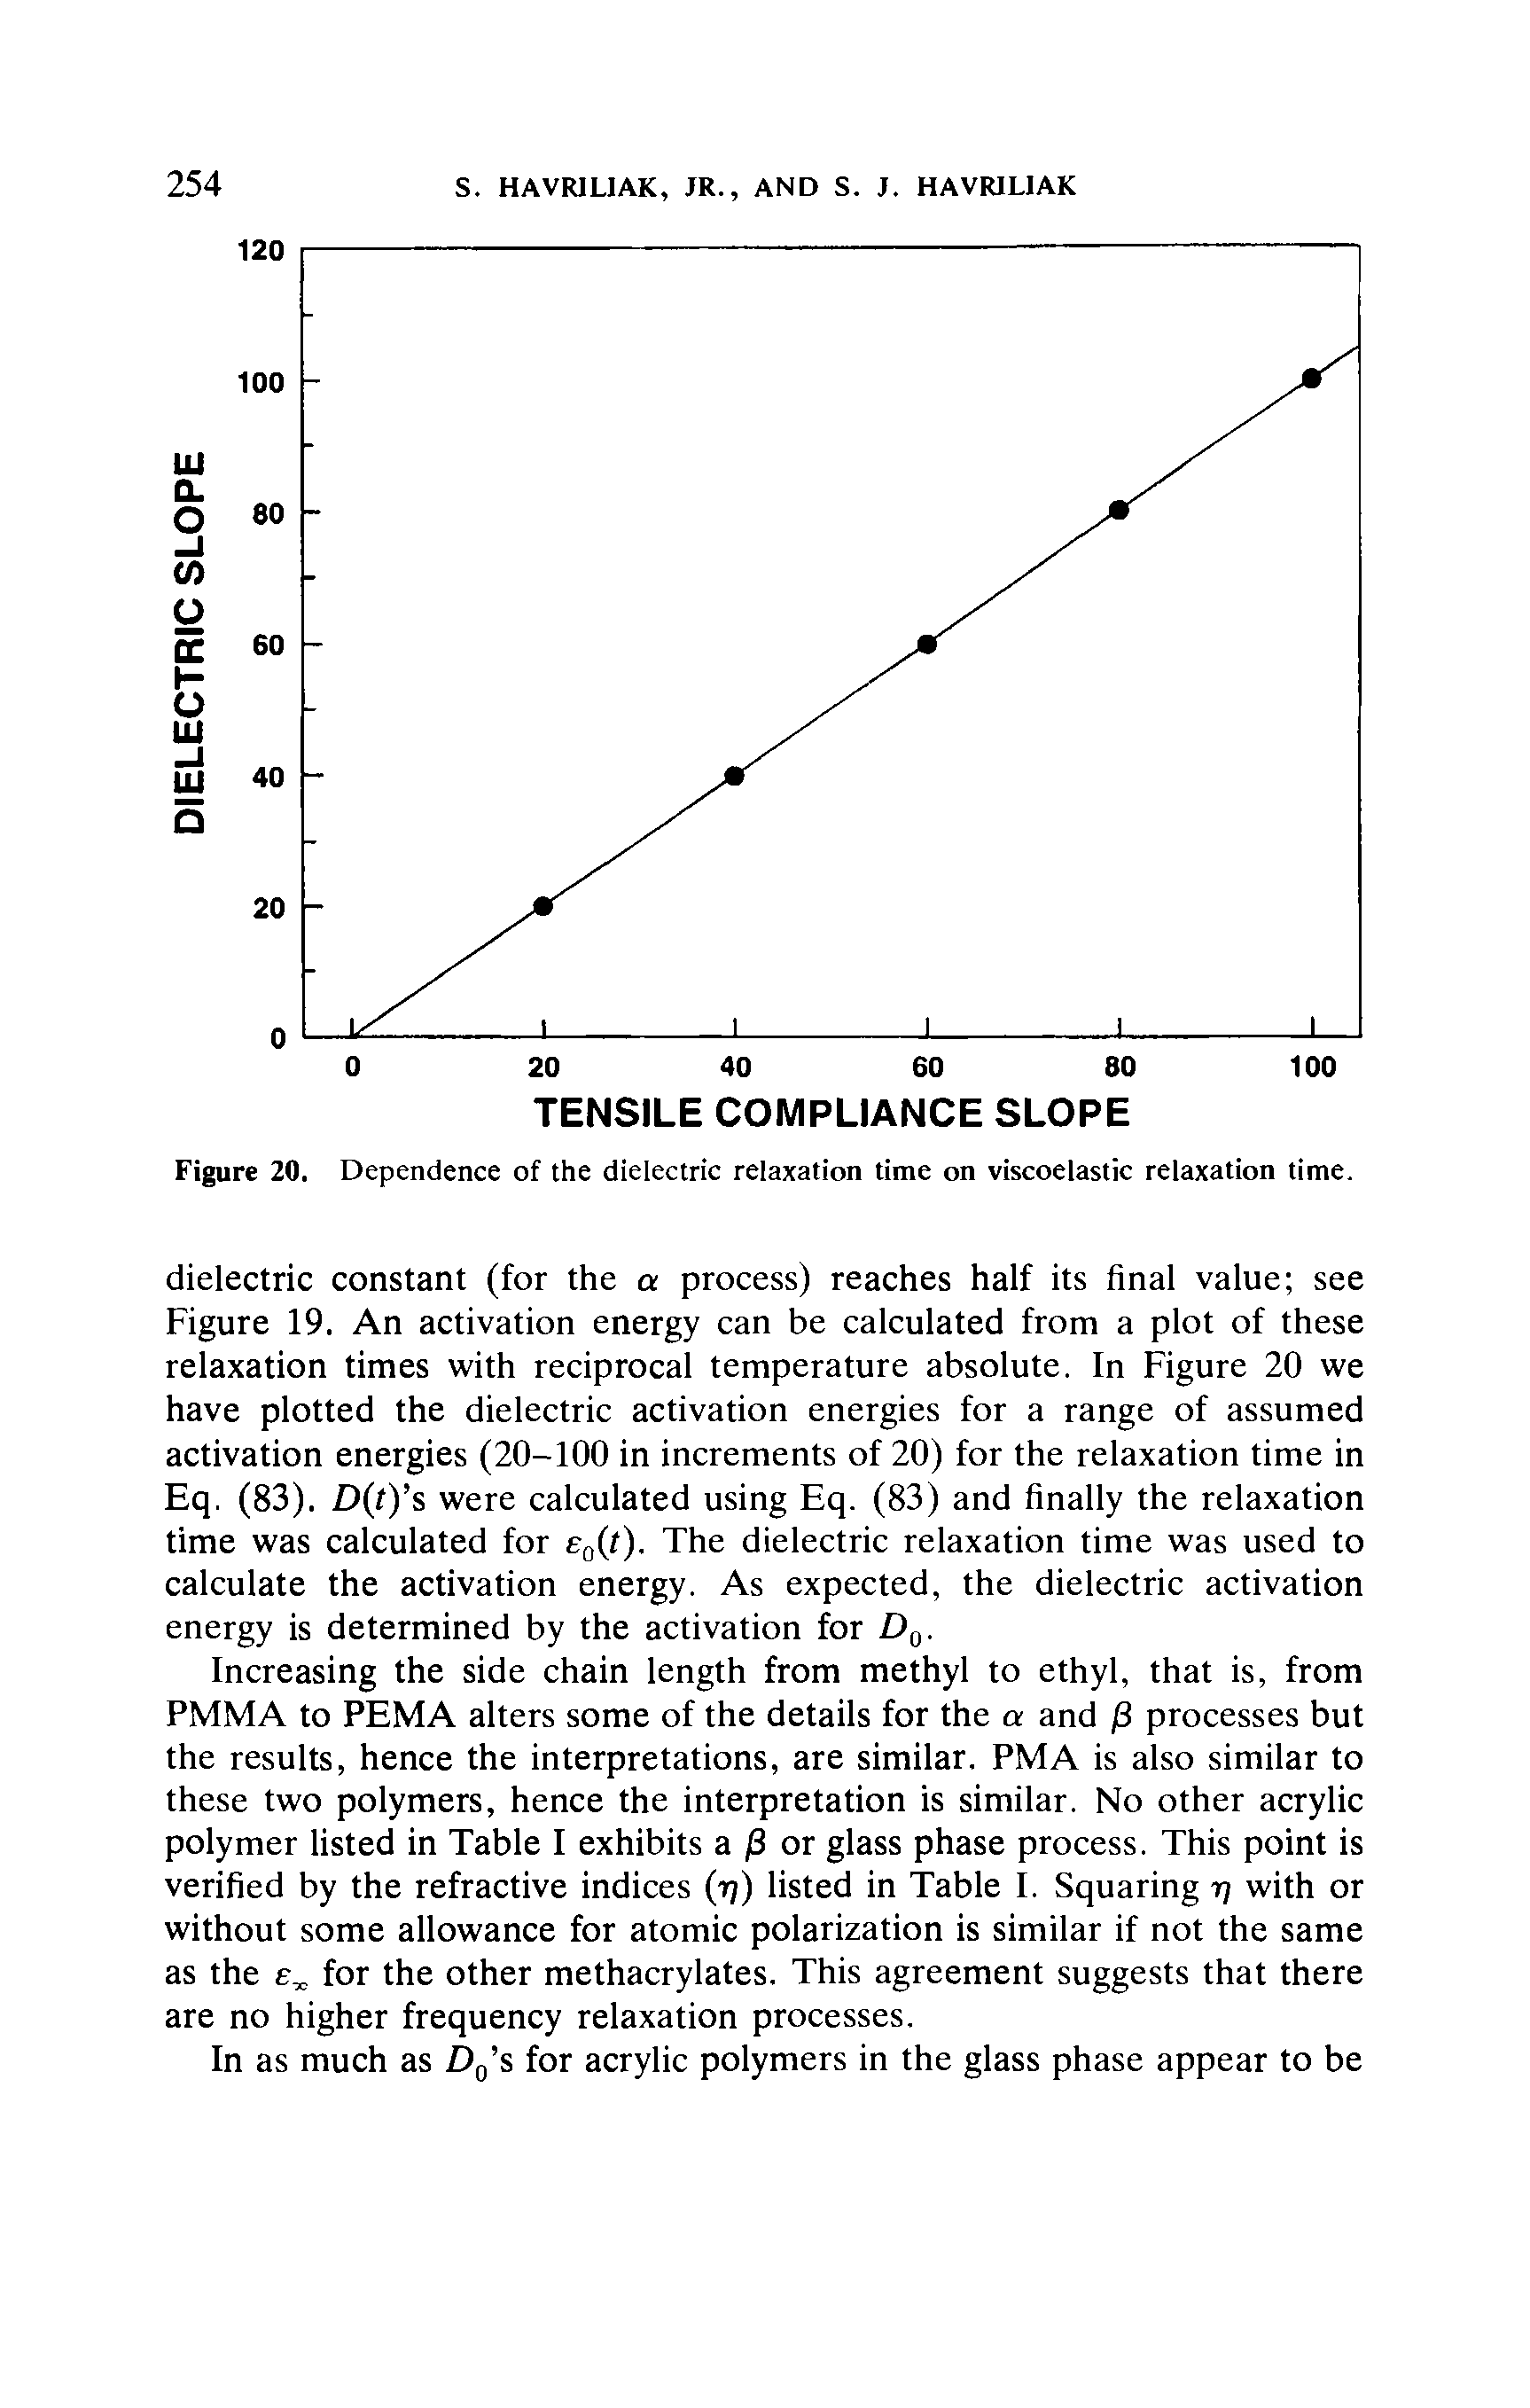 Figure 20. Dependence of the dielectric relaxation time on viscoelastic relaxation time.